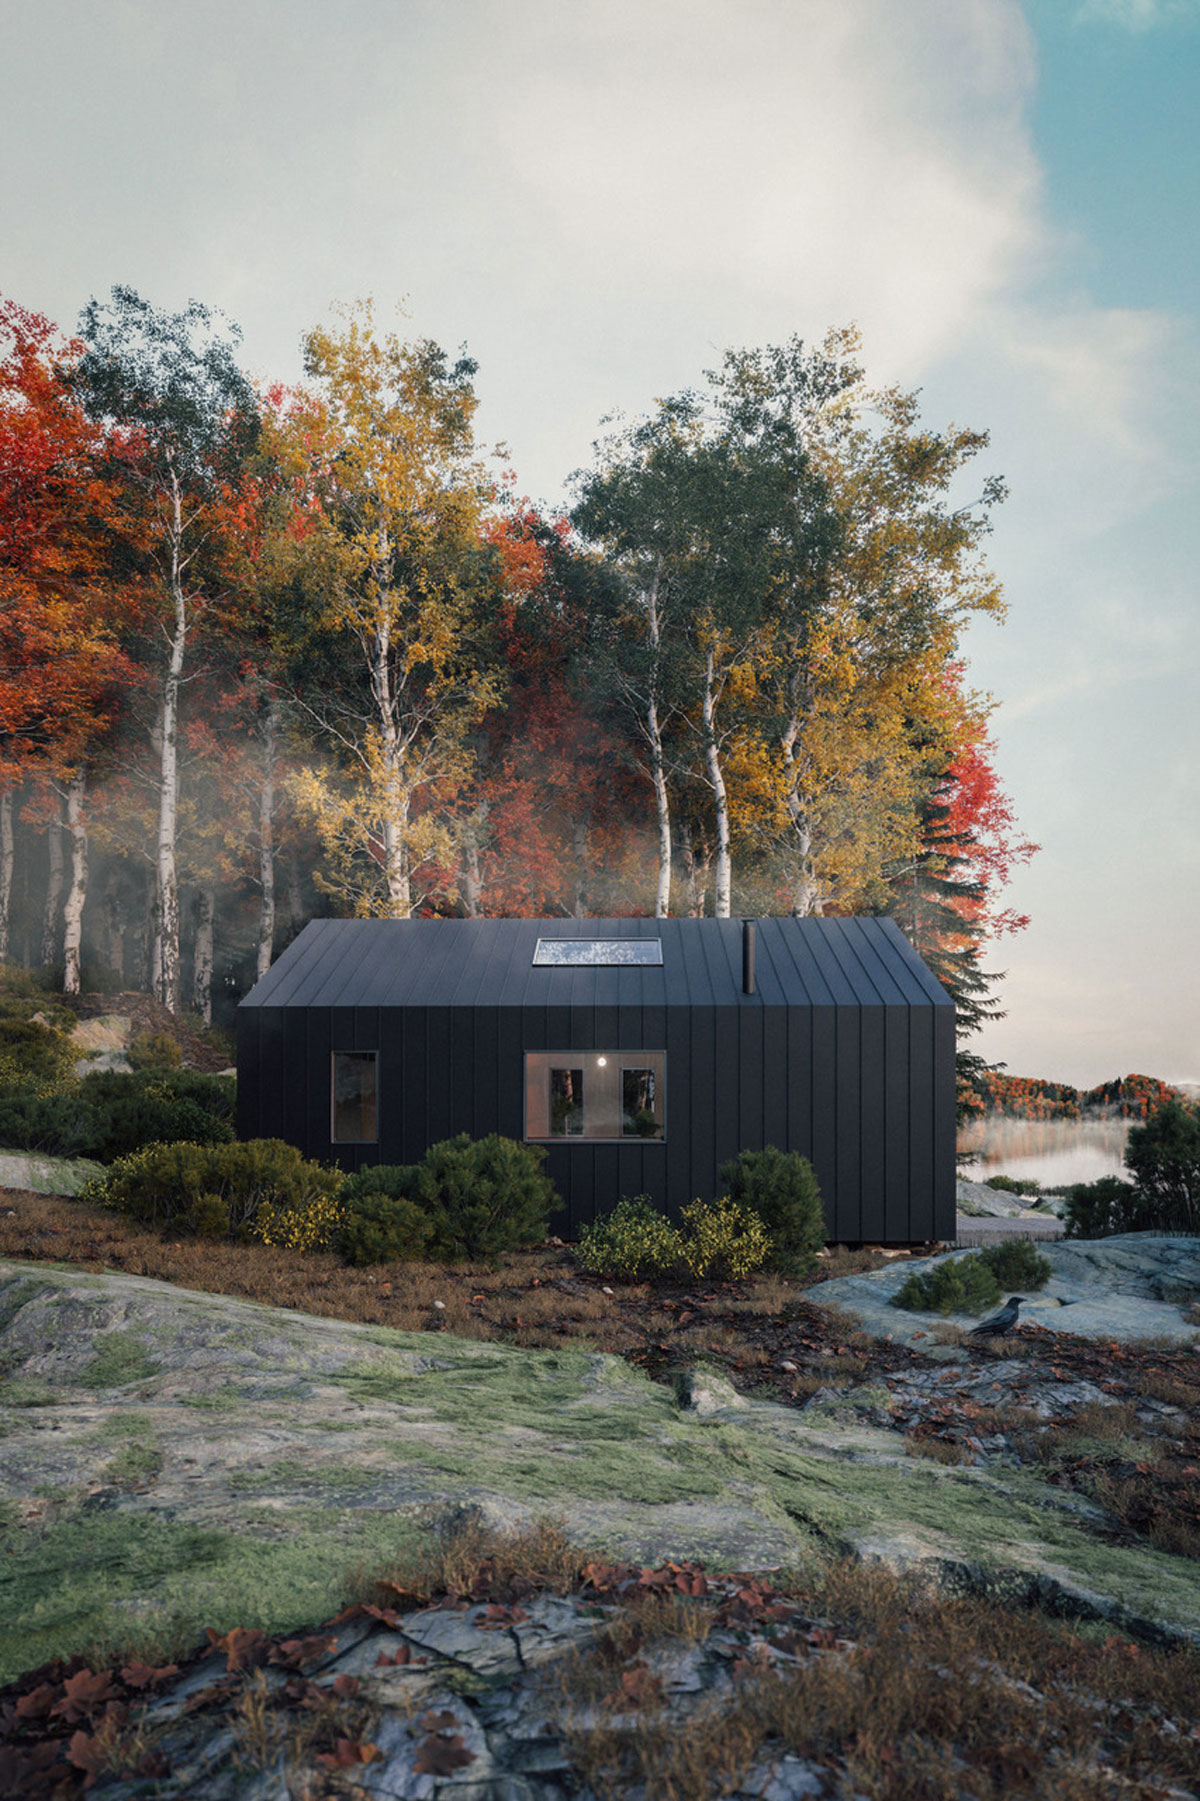 Backcountry Hut Concept House by Leckie Studio